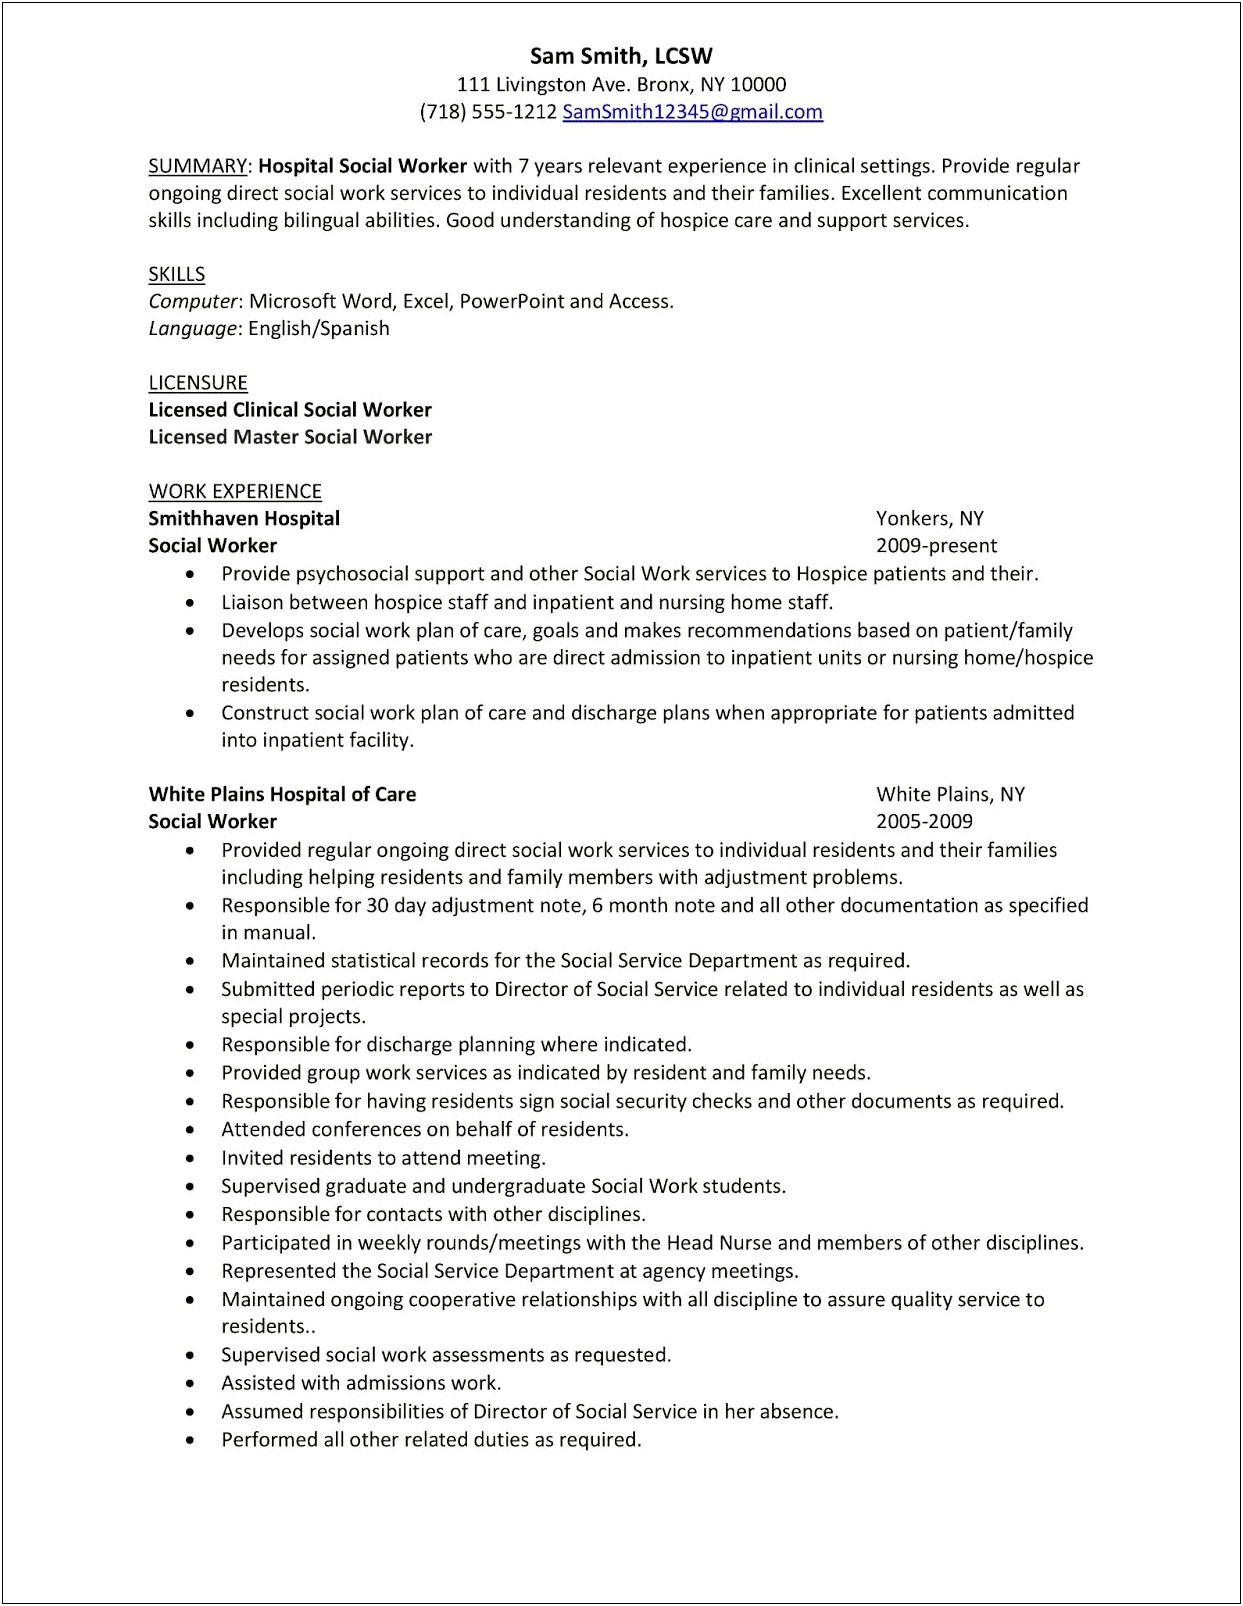 Sample Resume For Director Of Social Services